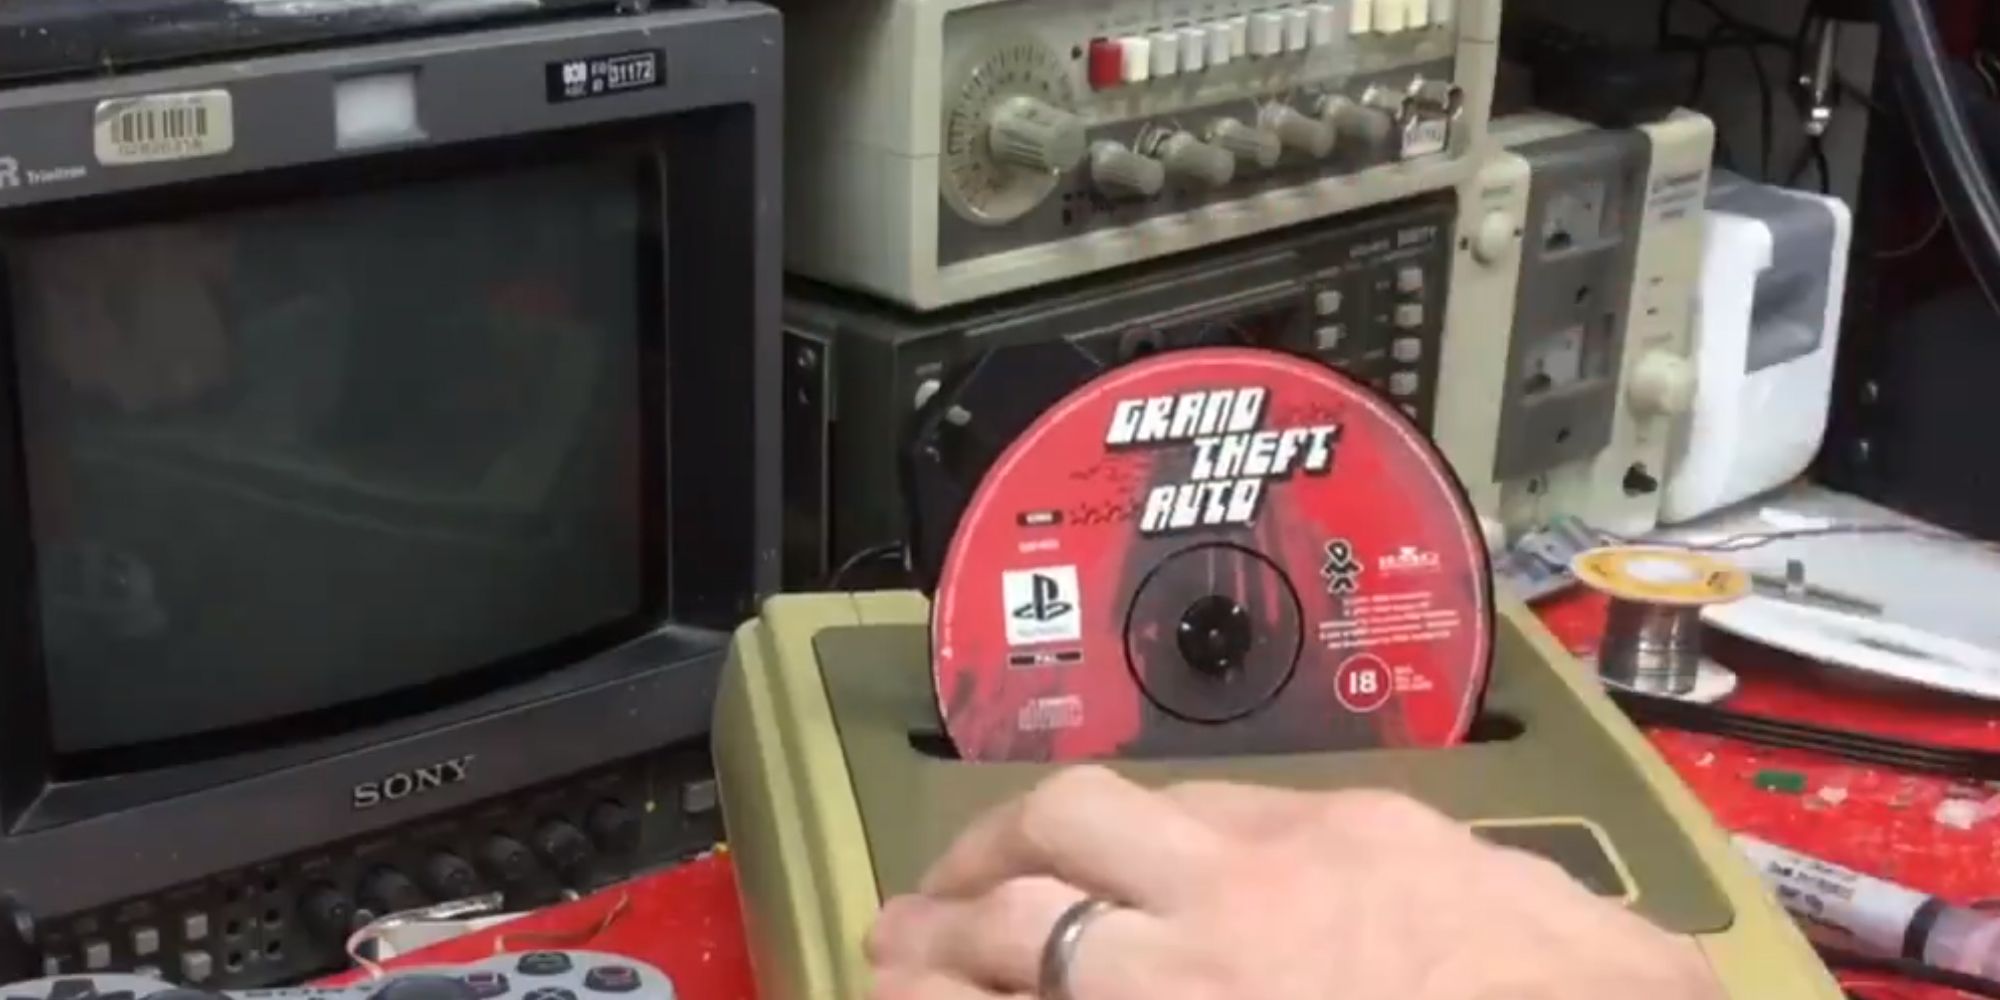 homemade Nintendo PlayStation console with exposed Grand Theft Auto disc